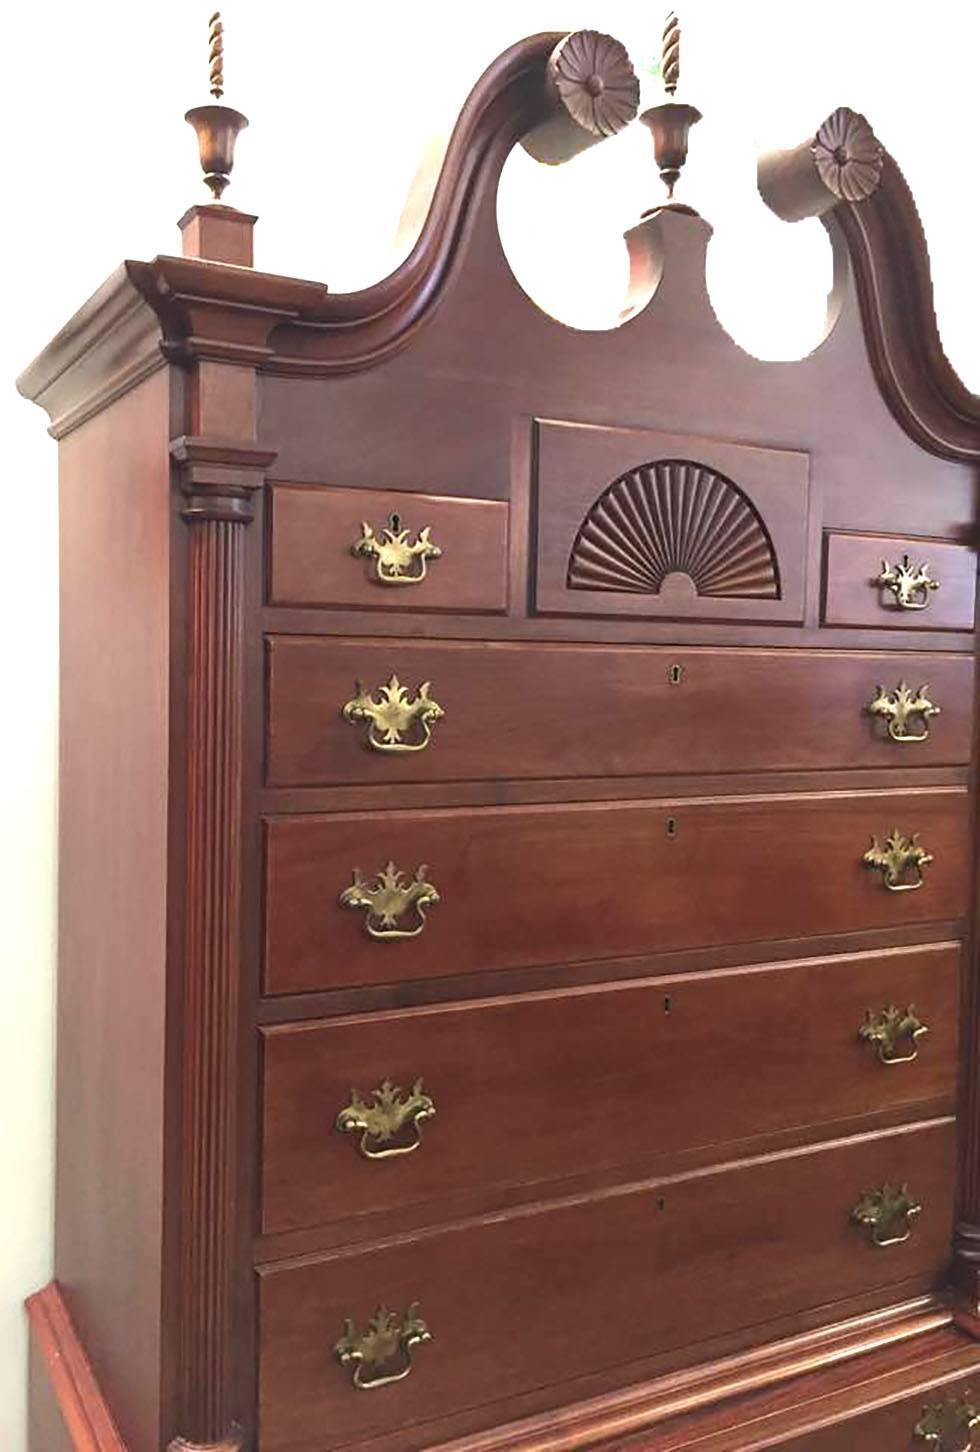 Mahogany highboy attributed to Kittinger. Top piece has carved finials, carved shell, and carved flowers. Six drawers with brass decorative handles. Bottom piece has three drawers with another carved shell. Four legs lead into a ball-and-claw